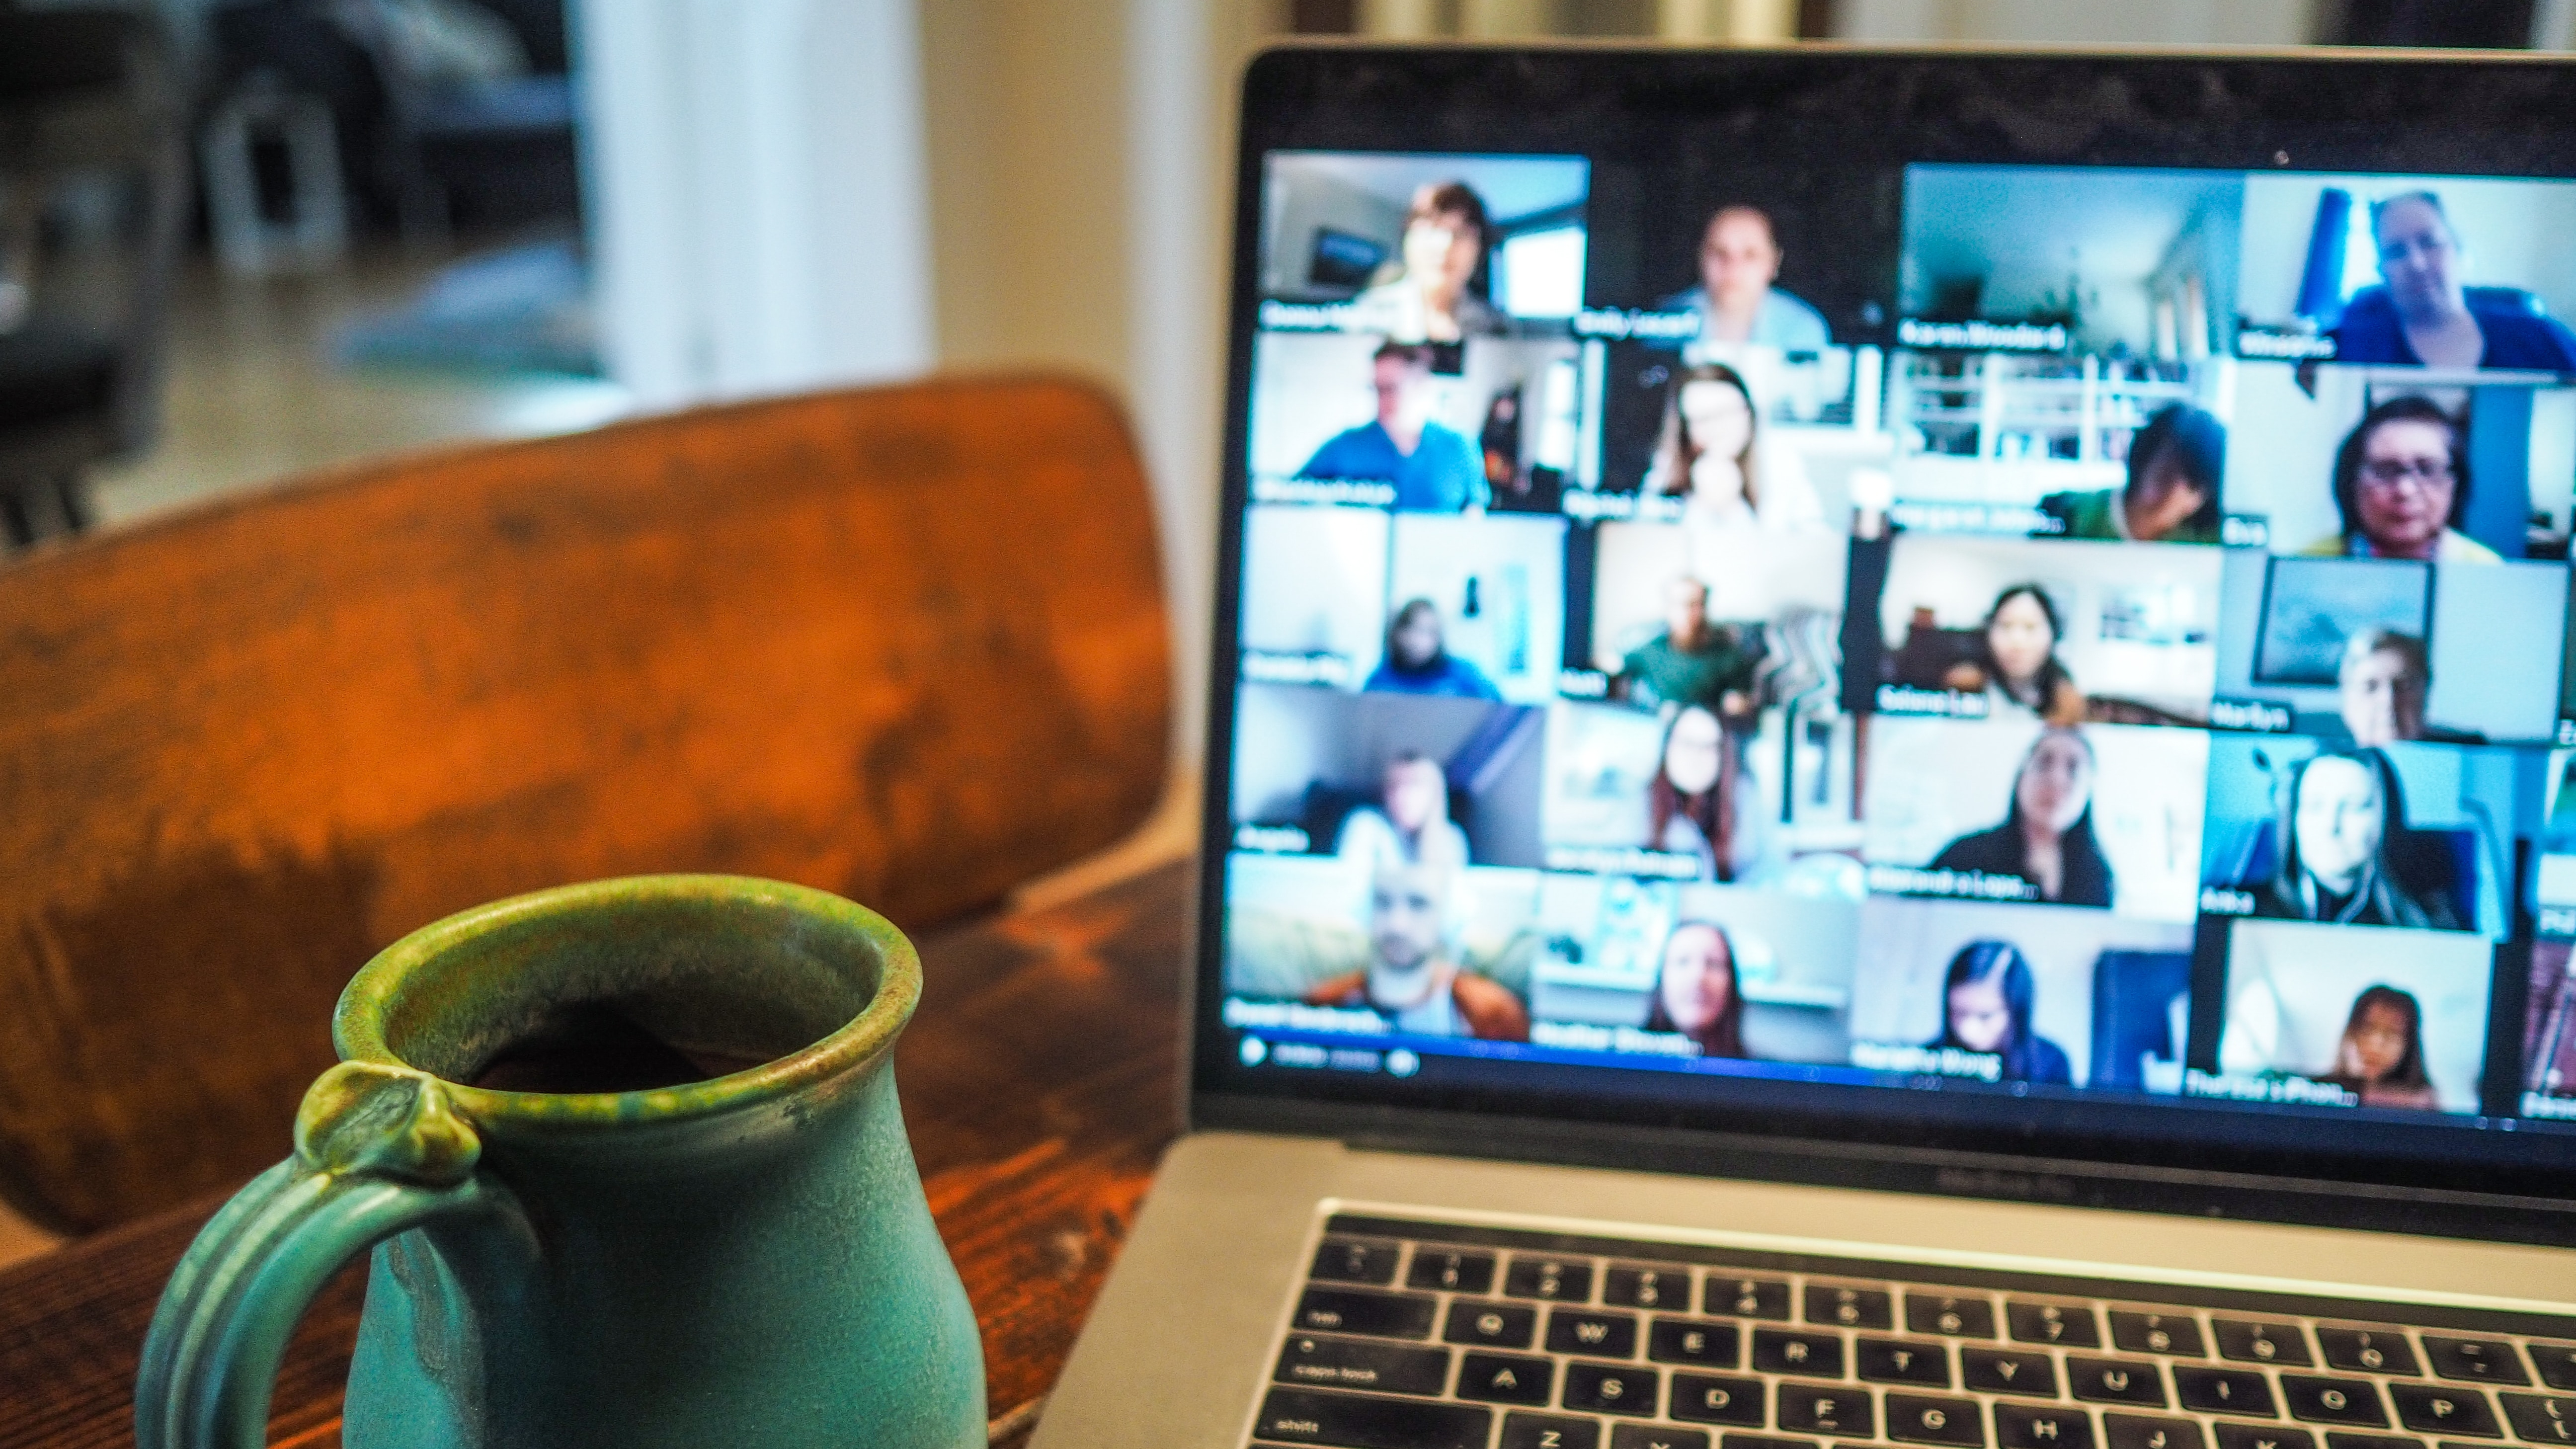 A laptop screen showing a group of people having an online meeting